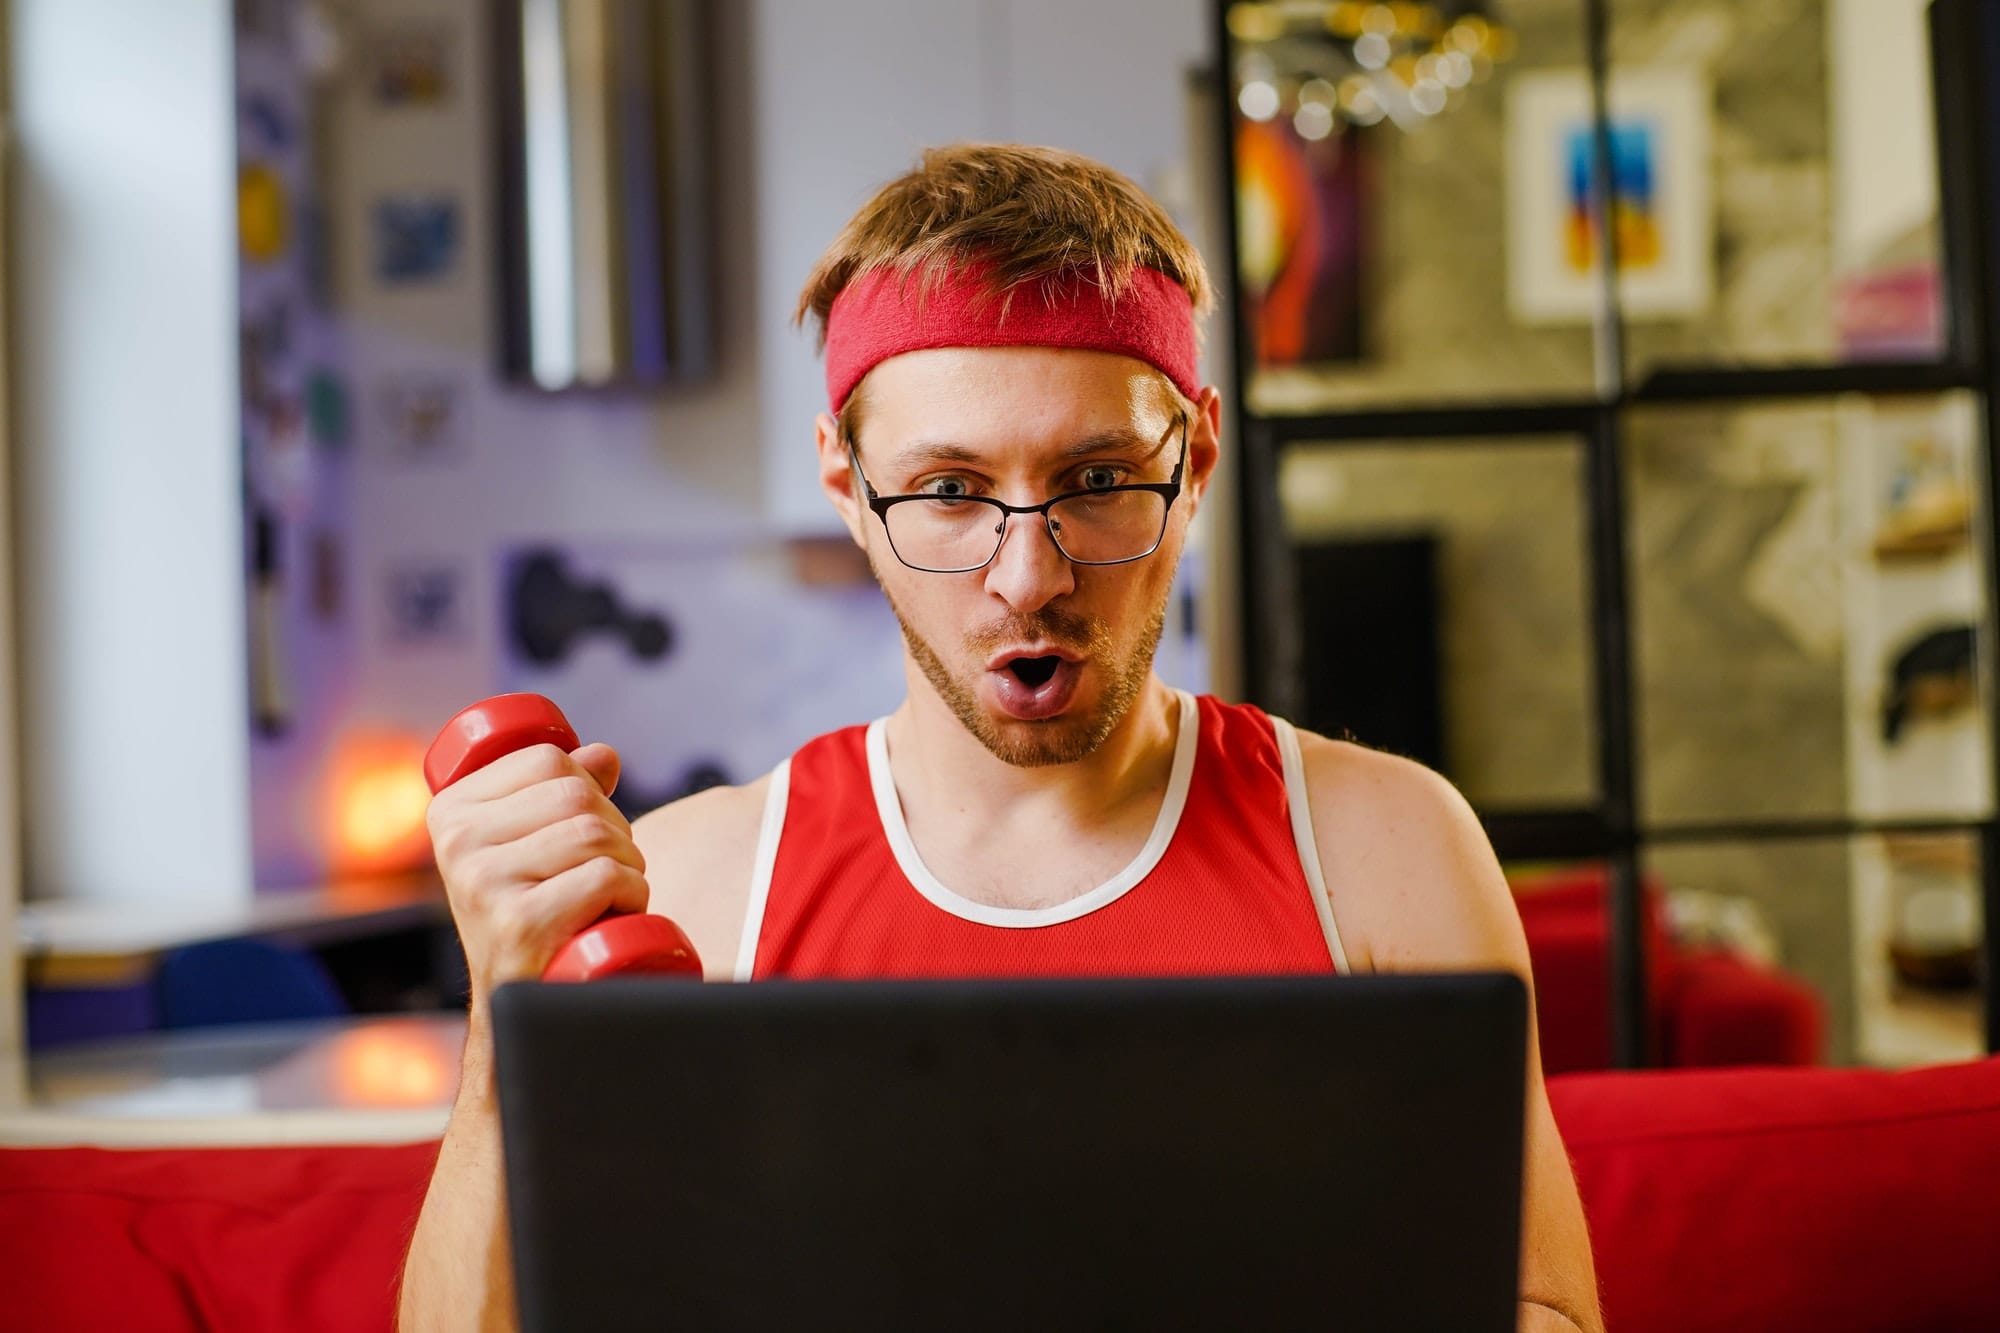 Funny young man geek with dumbbells watching training program on laptop online.